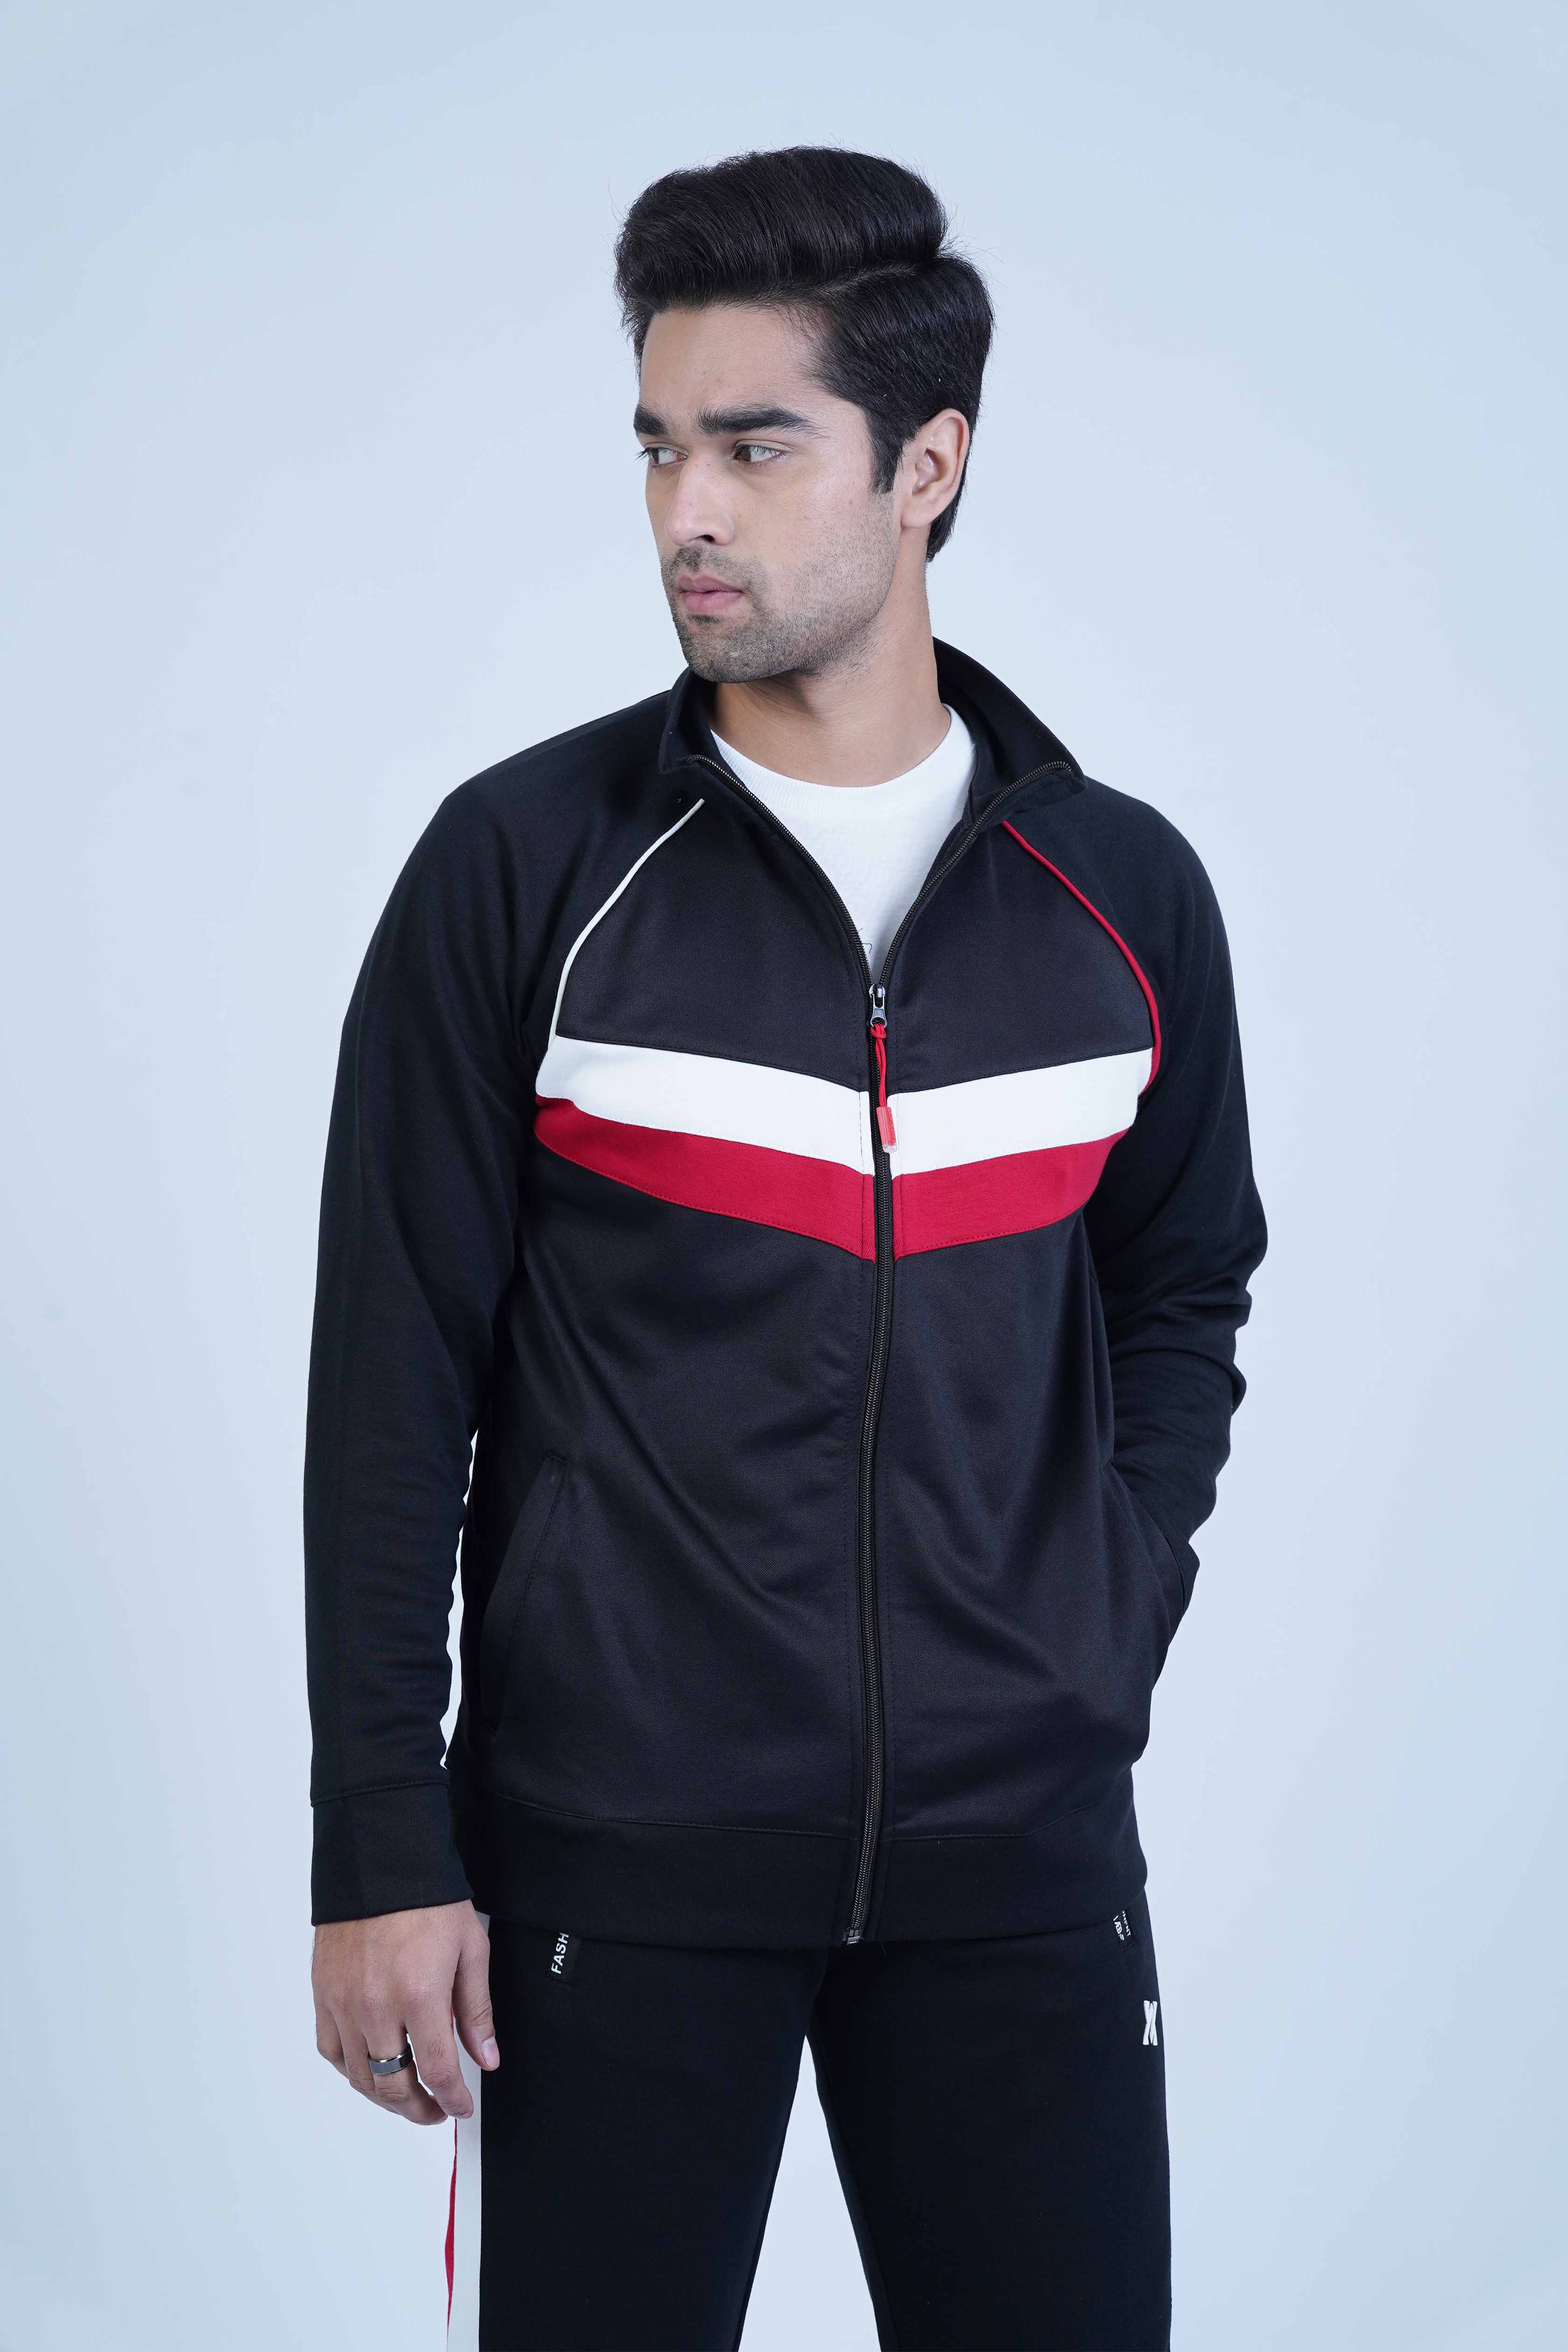 The Xea Men's Clothing: Edition Pro 1.5 Tracksuit